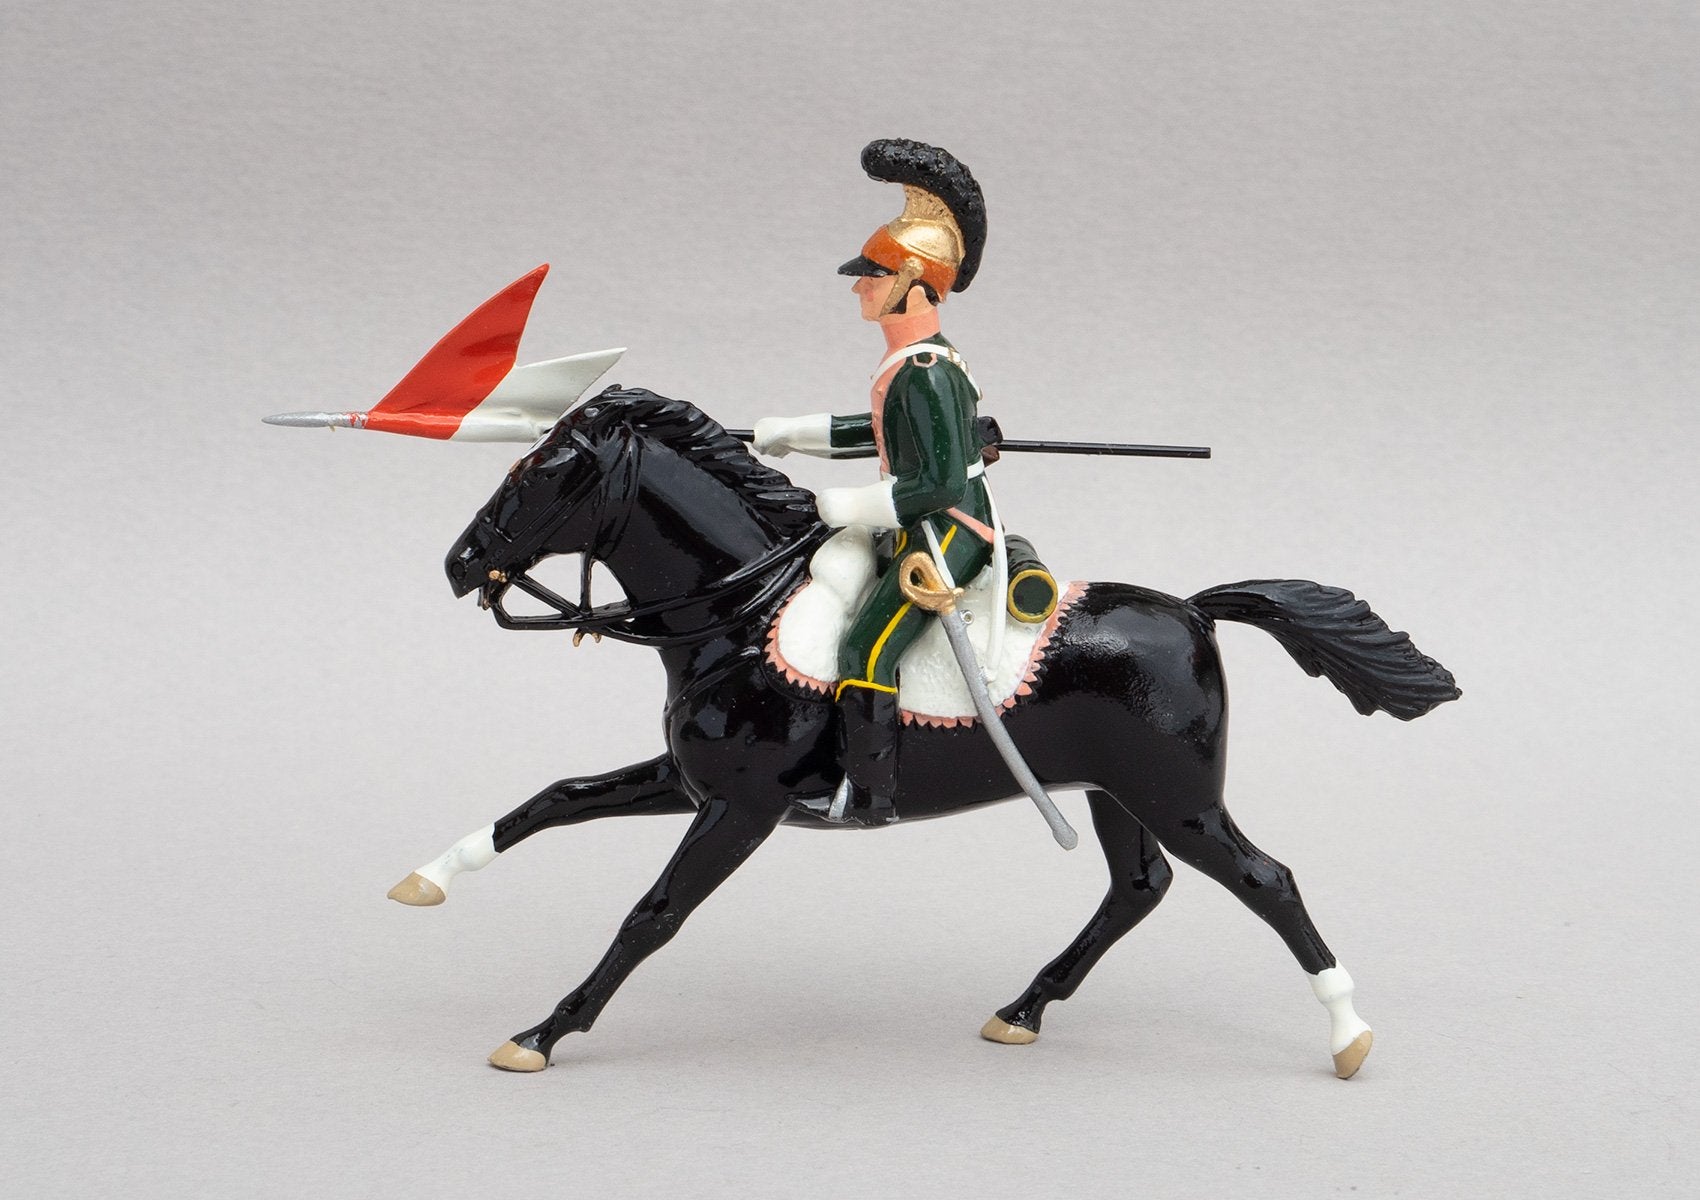 Set 131 3rd Chevau-Legers Lancers | French Cavalry | Napoleonic Wars | Single mounted cavalryman with lance adorned with red and white pennant | Waterloo | © Imperial Productions | Sculpt by David Cowe